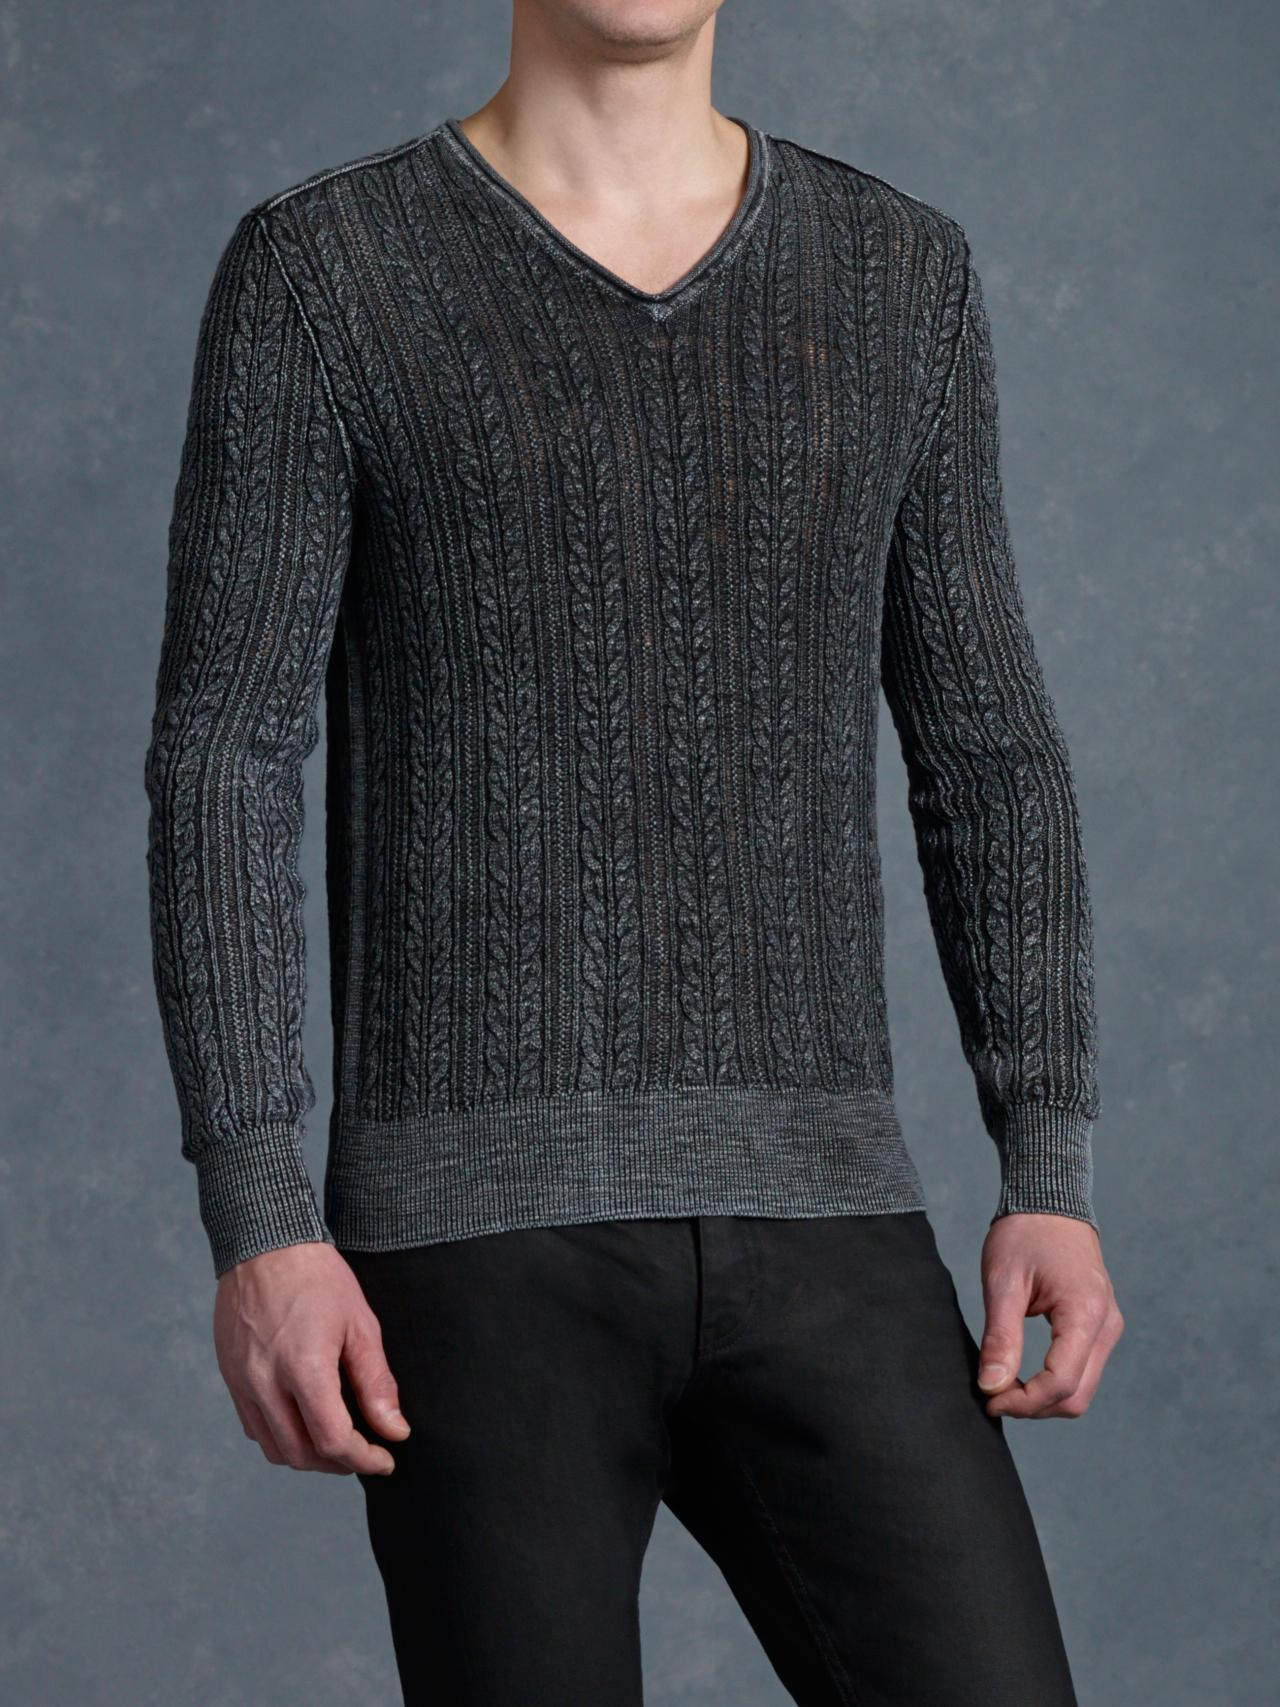 John Varvatos V-Neck Cable Knit Sweater in Gray for Men - Lyst